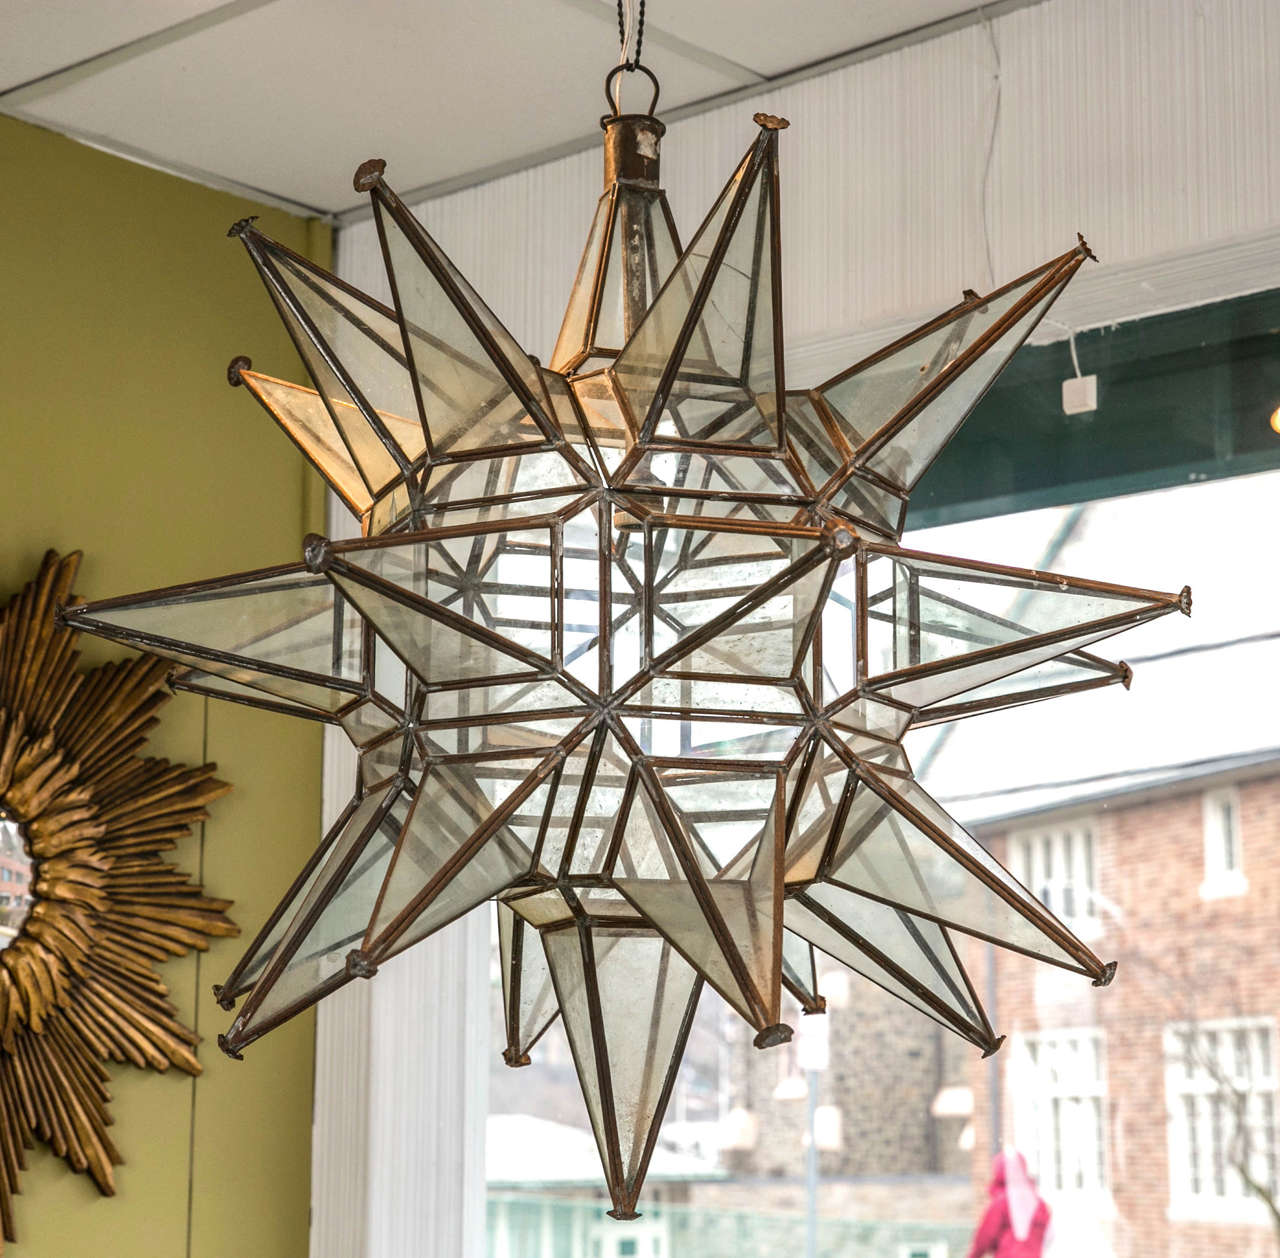 Unique brass and glass star-shaped lantern fixture.